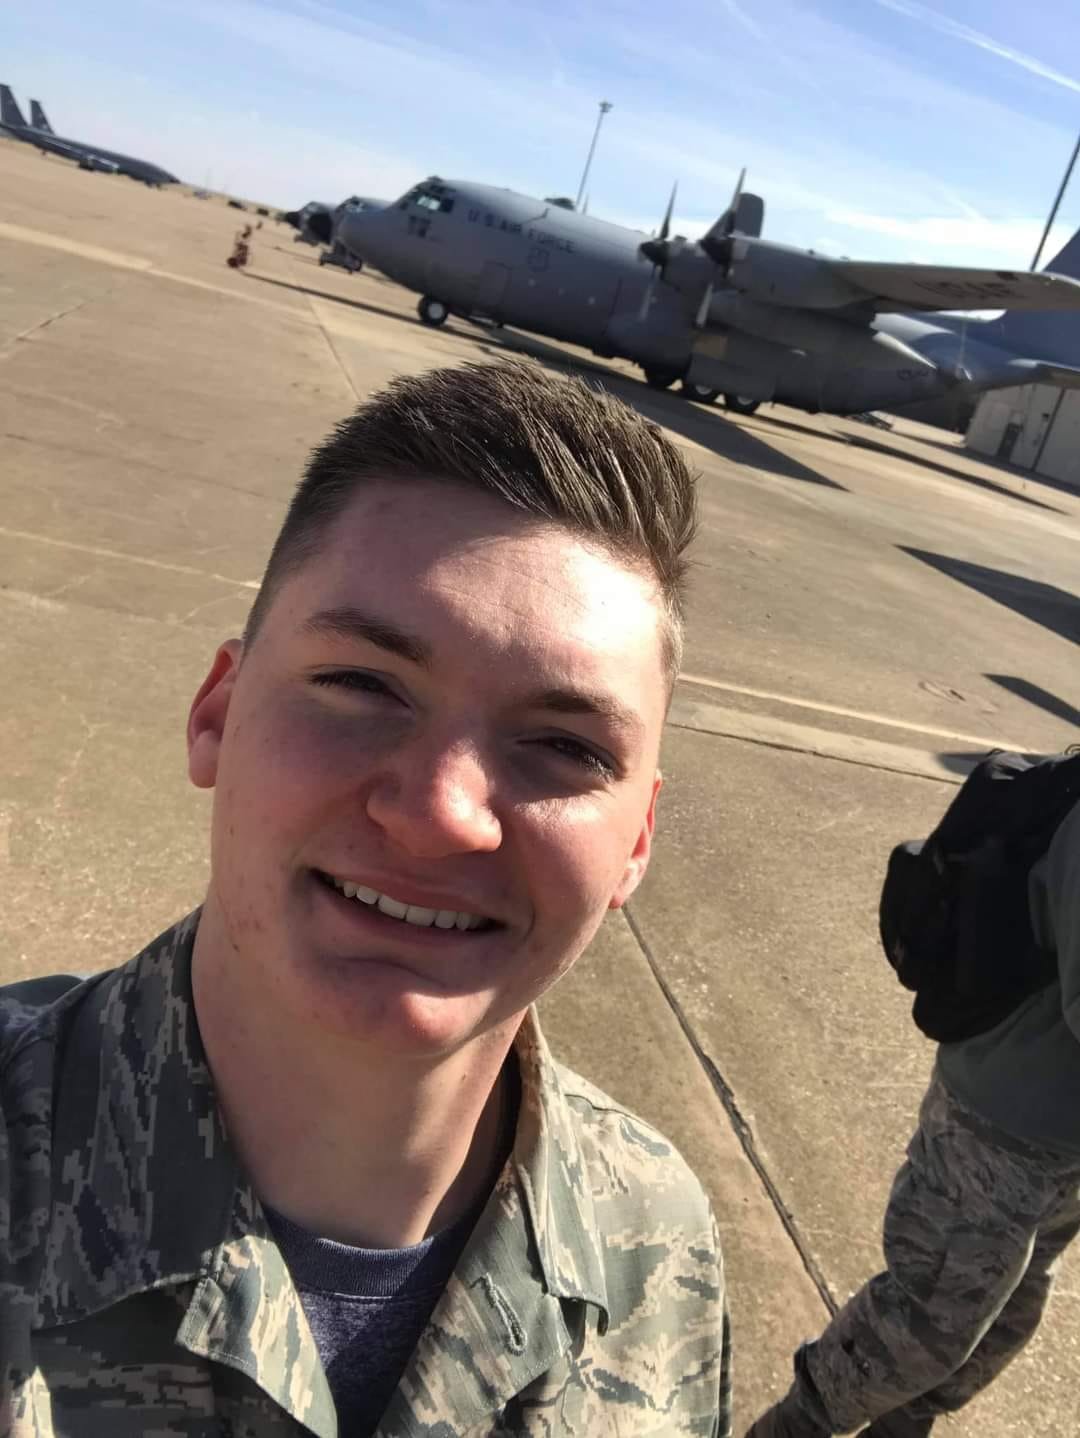 Senior Airman Pike. USAF, Crew Chief, C130s. Has served almost 4 years. Son of Betsy Sandbothe.